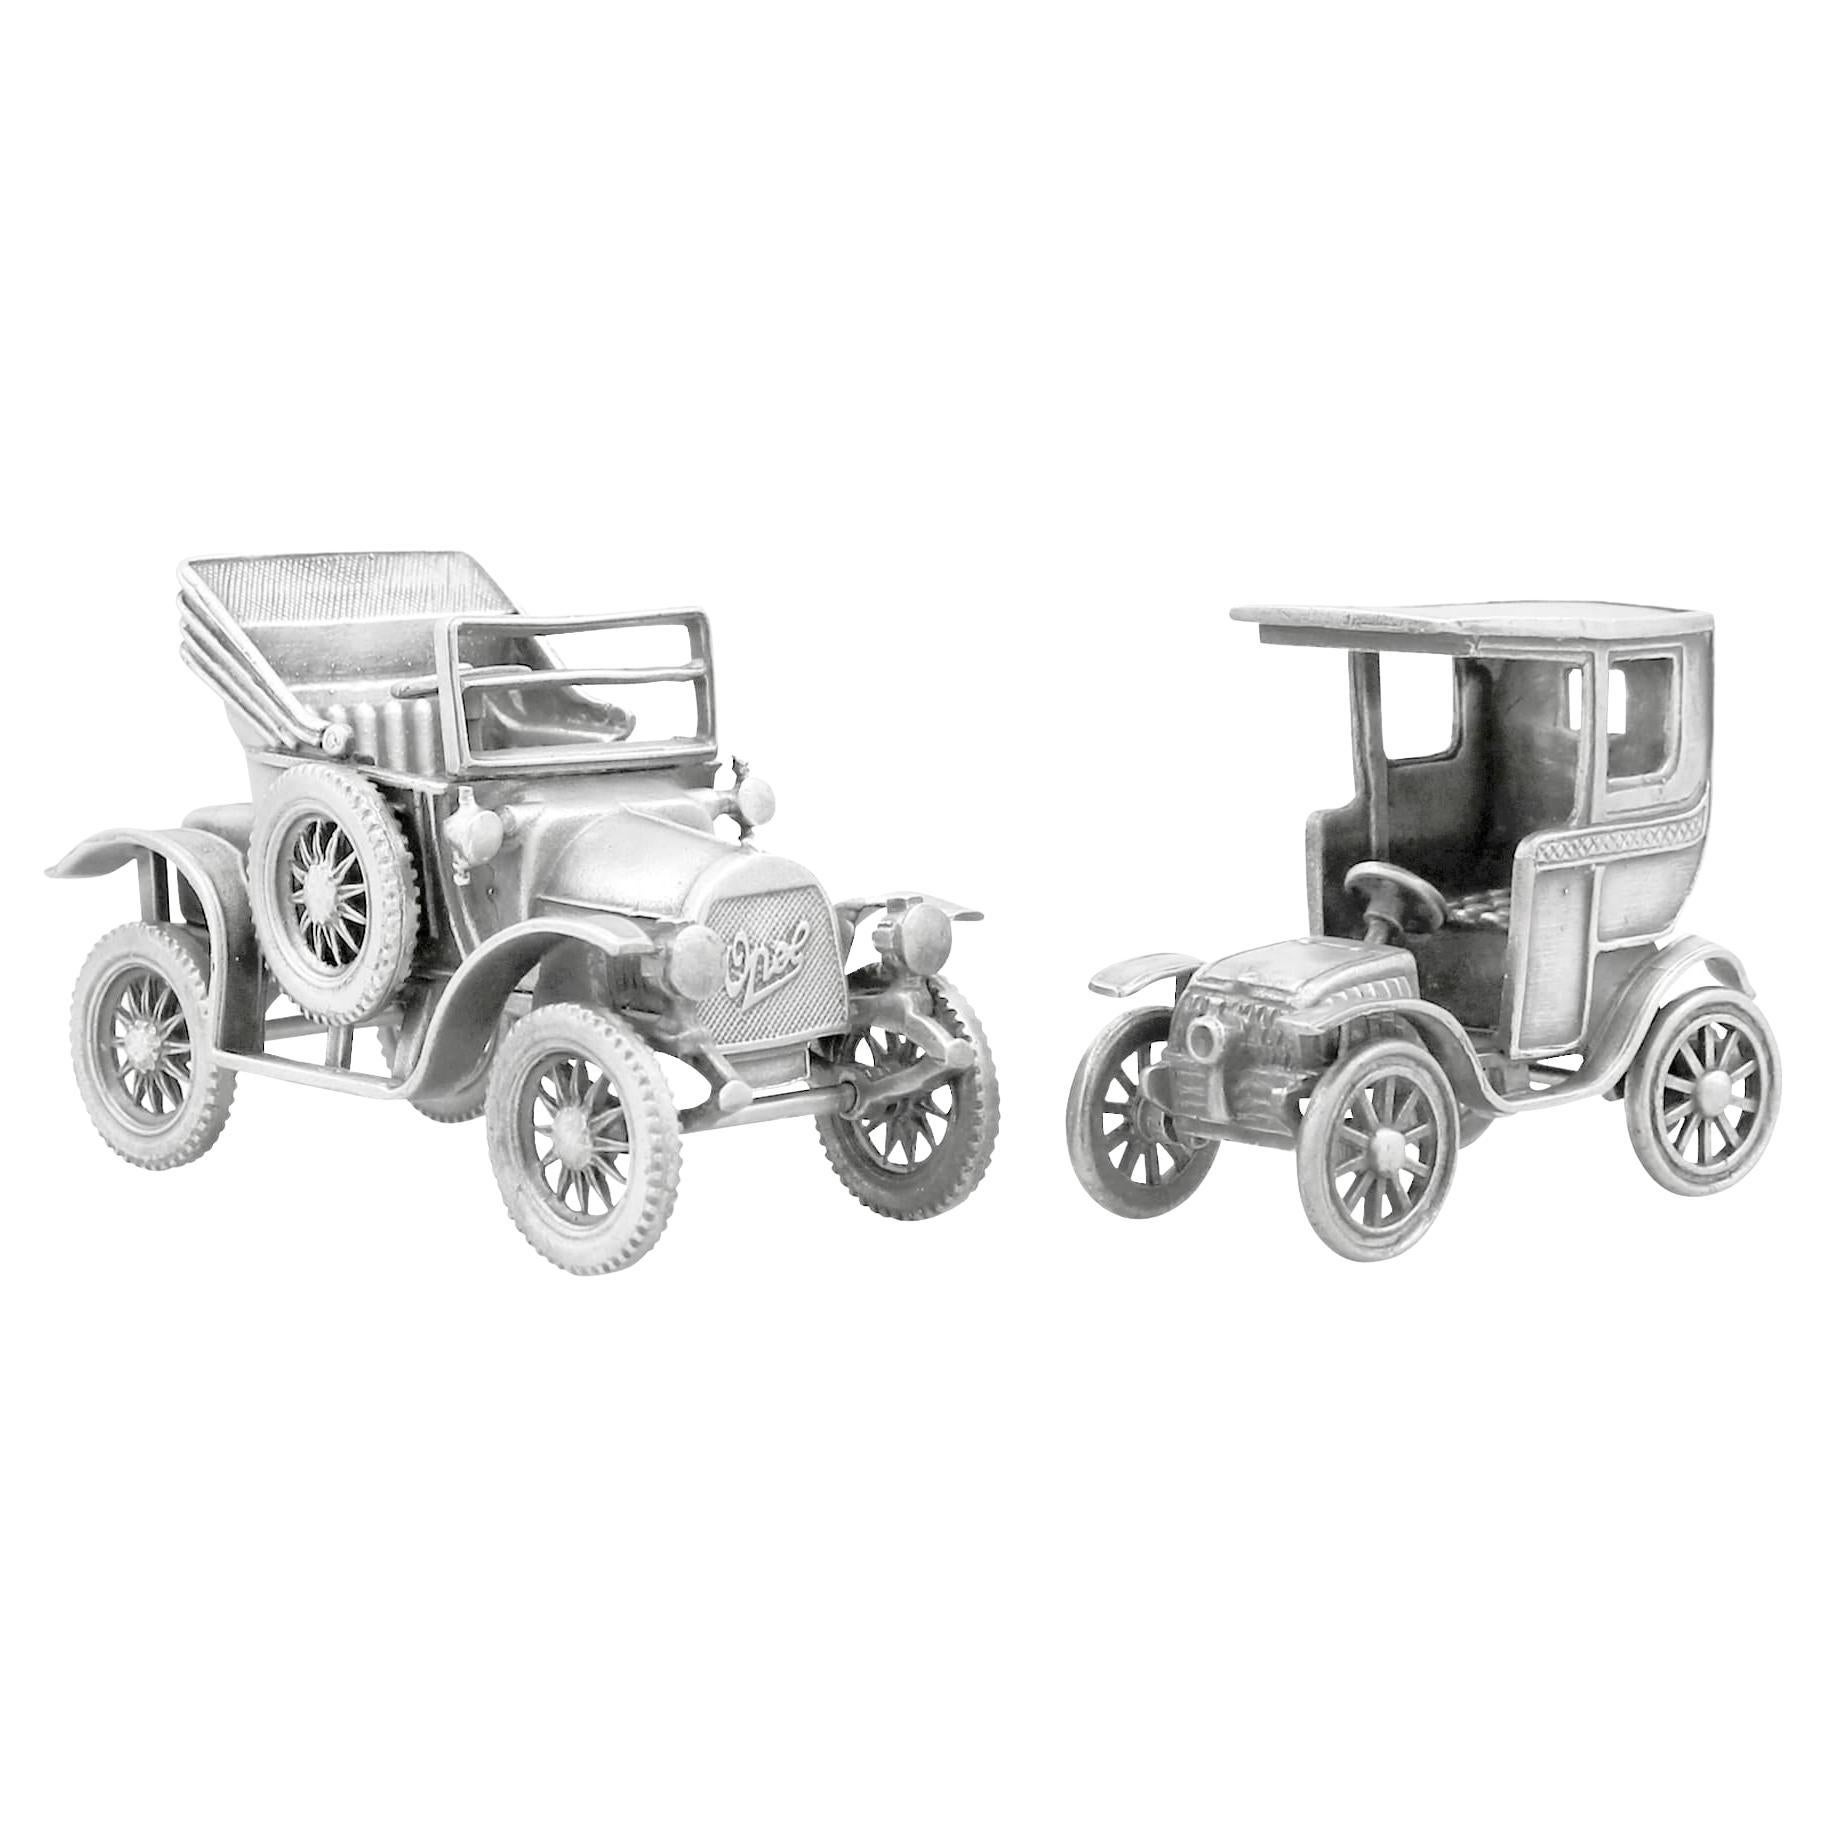 1970s Italian Sterling Silver Car Models or Table Ornaments For Sale